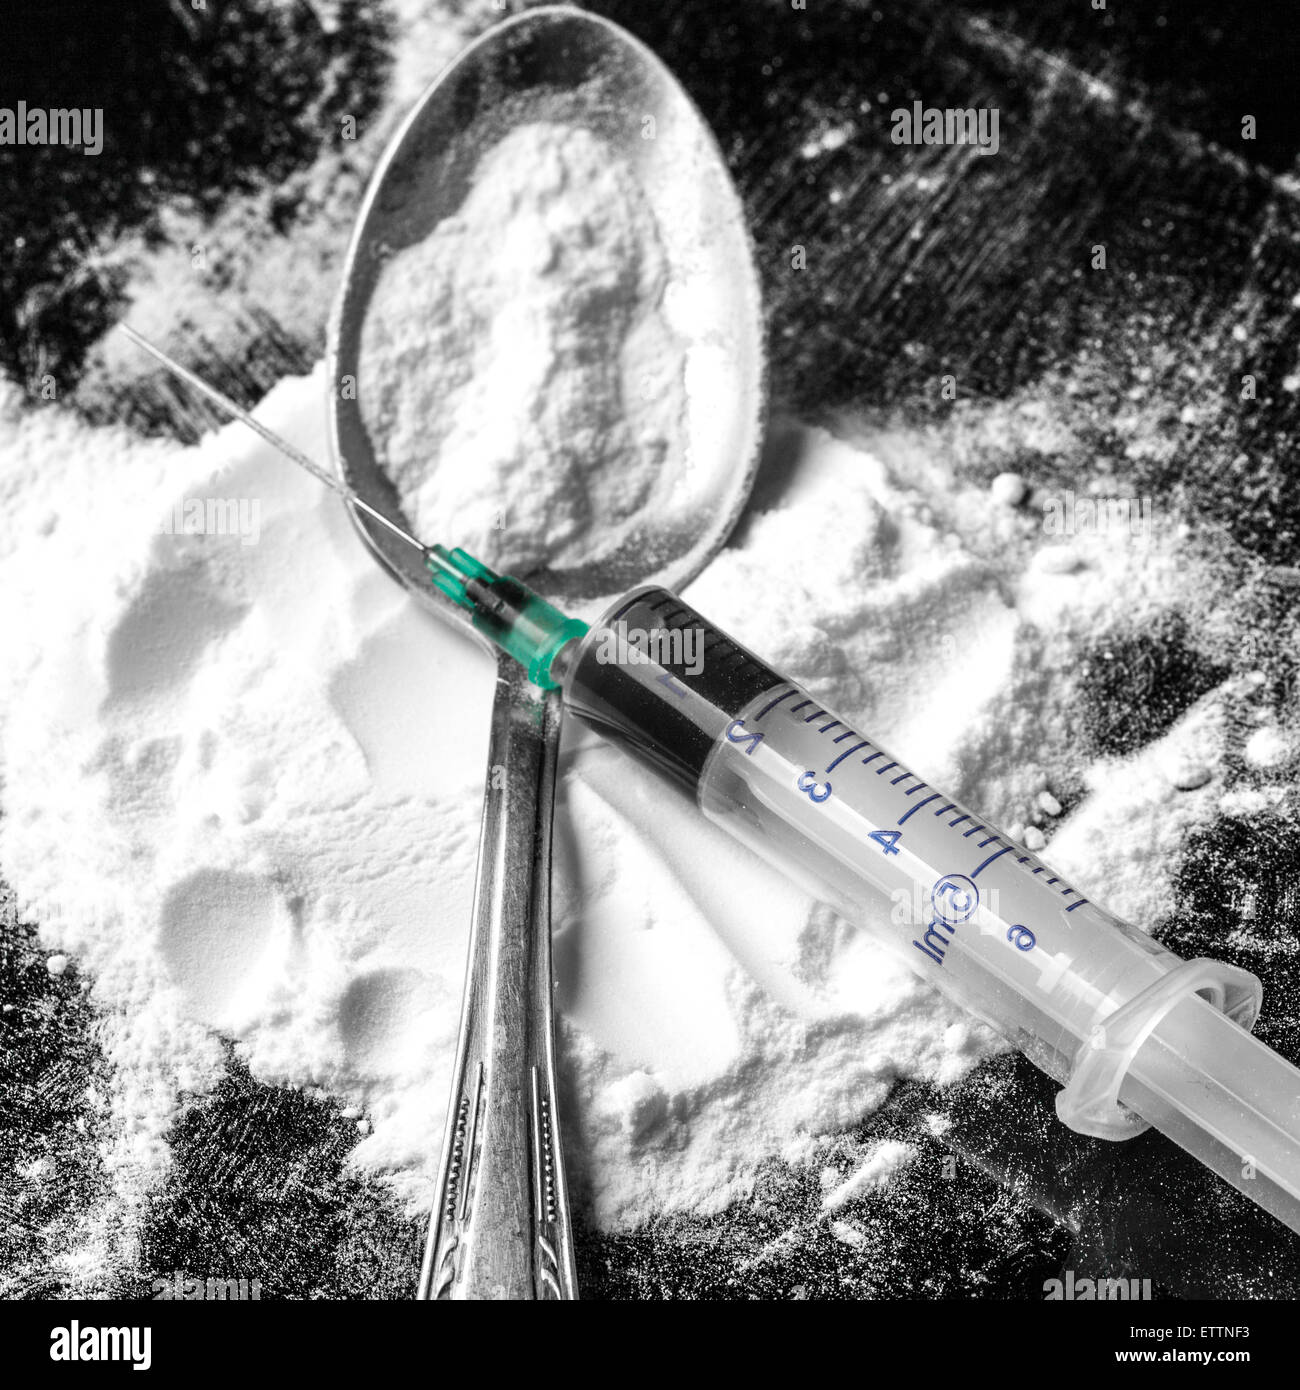 Drug syringe and cooked heroin on spoon Stock Photo